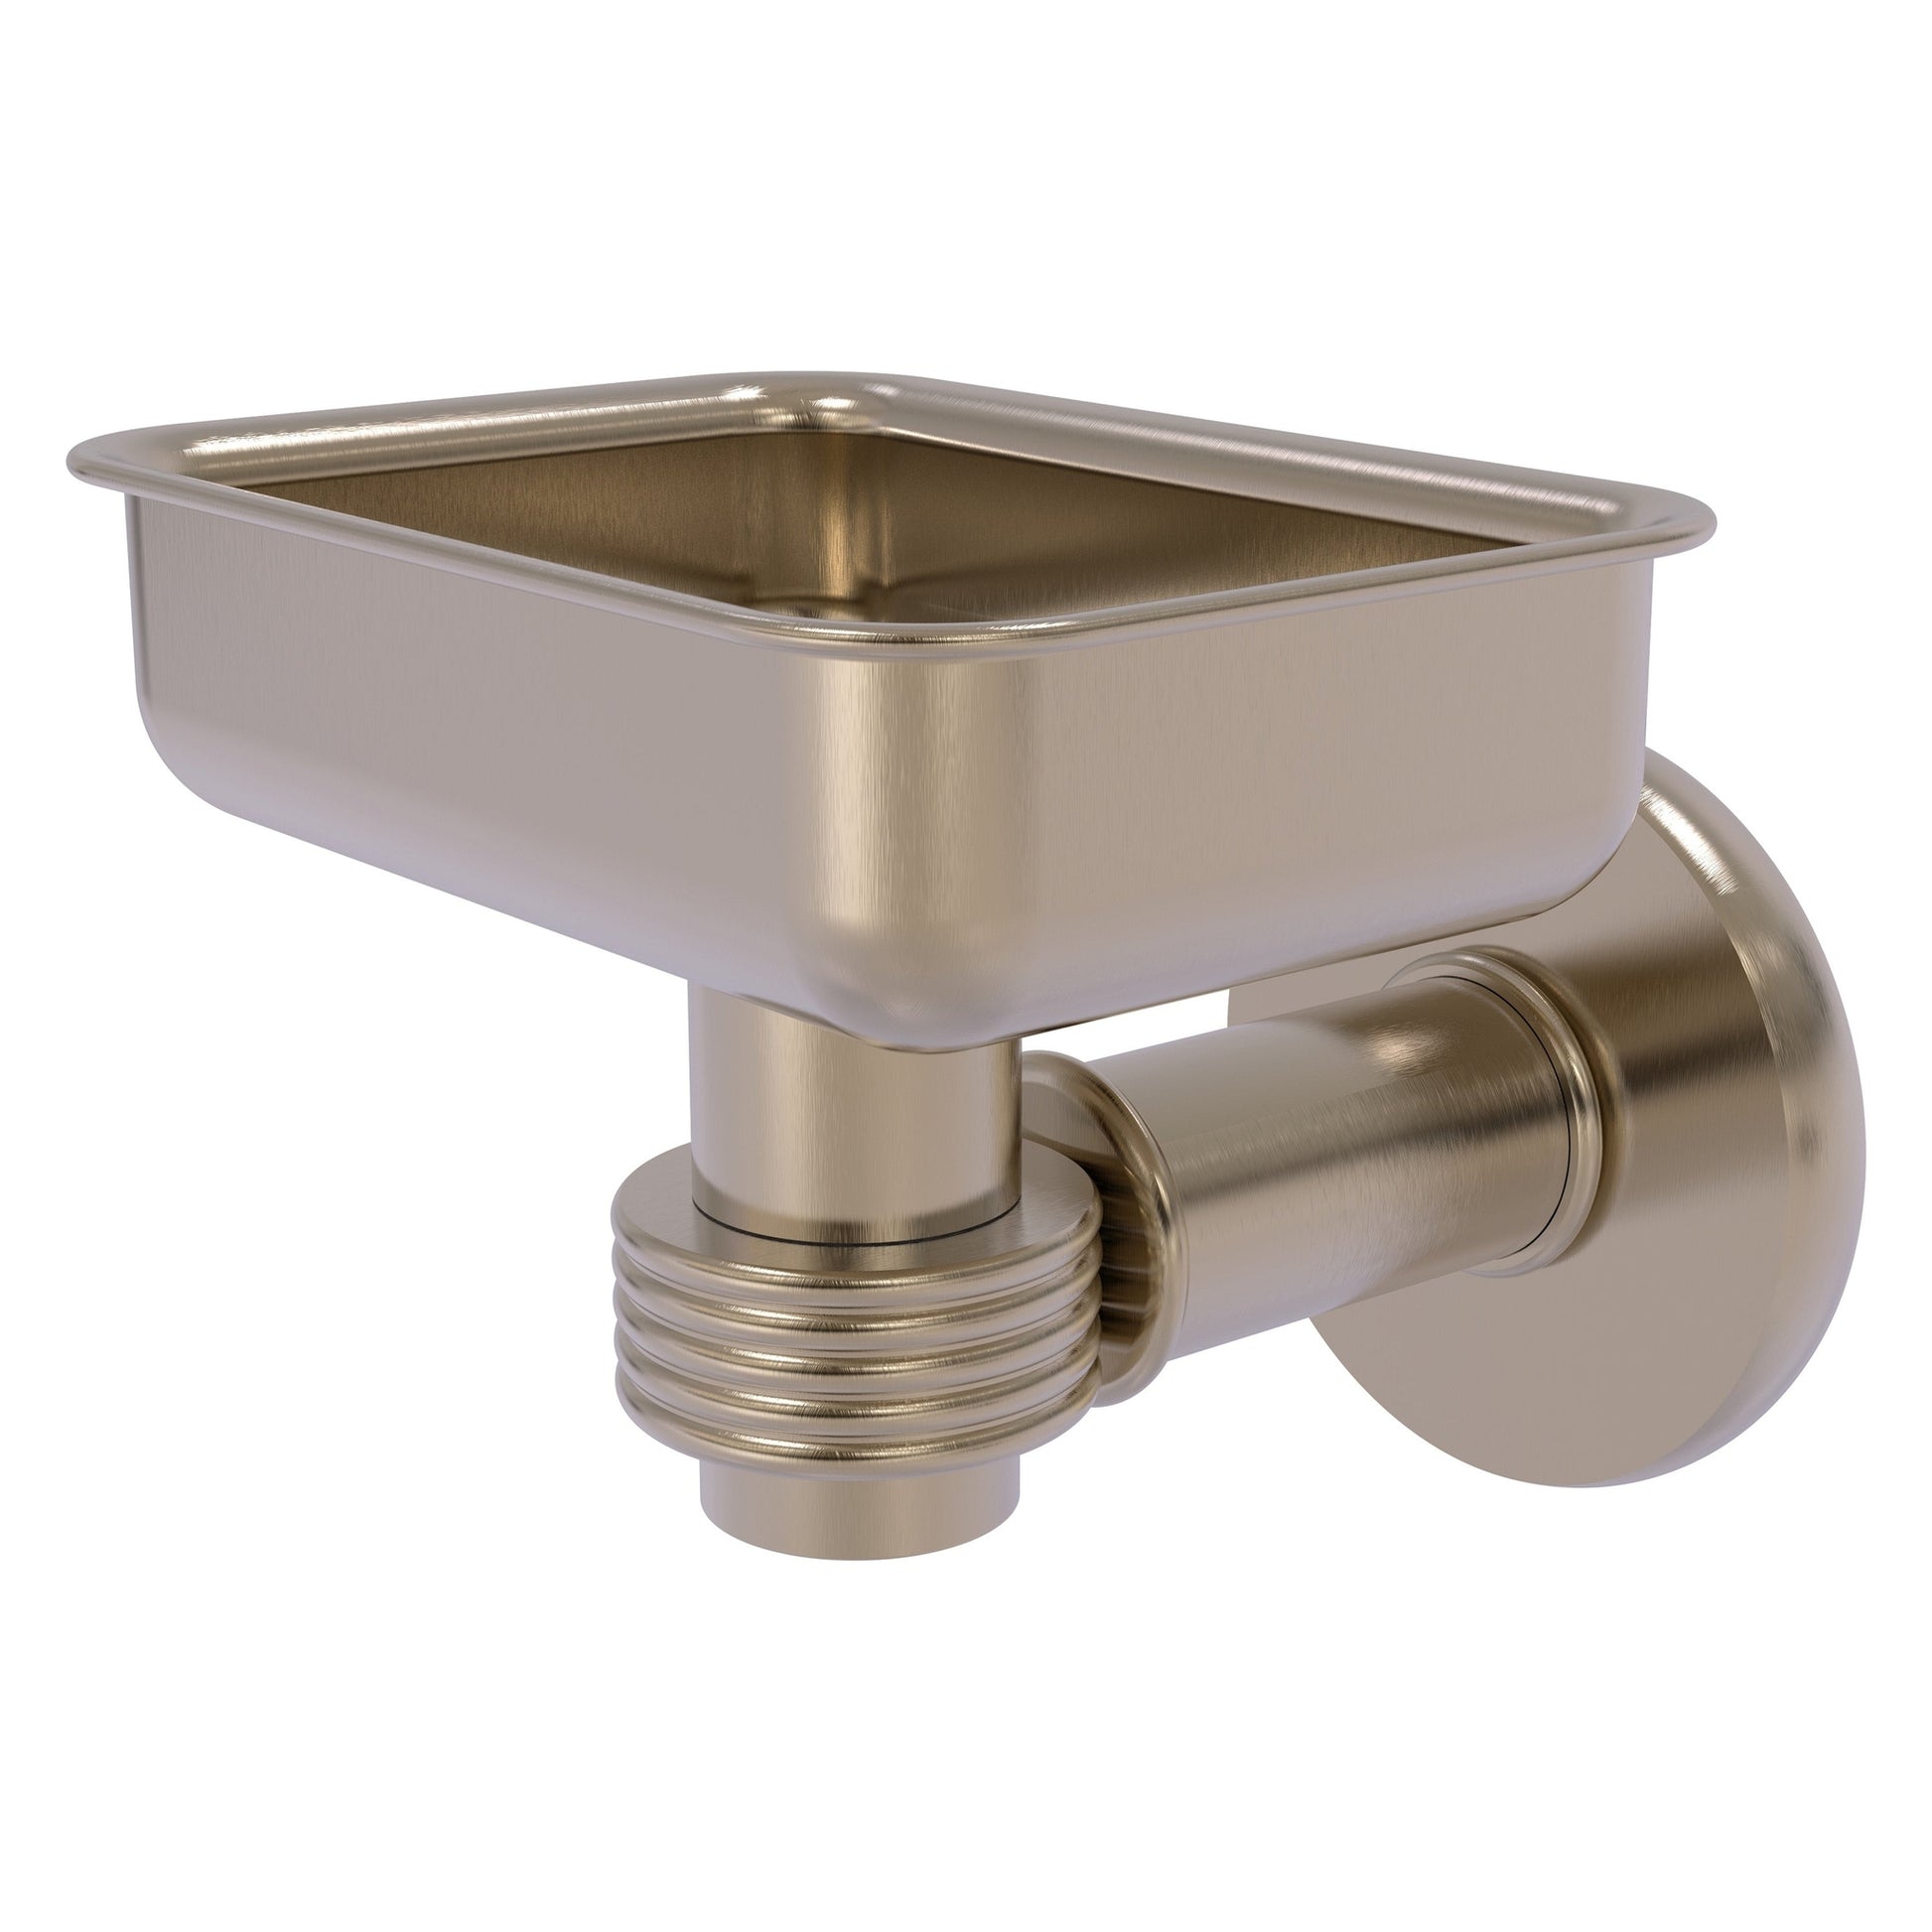 Allied Brass Continental 4.5" x 3.5" Antique Pewter Solid Brass Wall-Mounted Soap Dish Holder with Grooved Accents